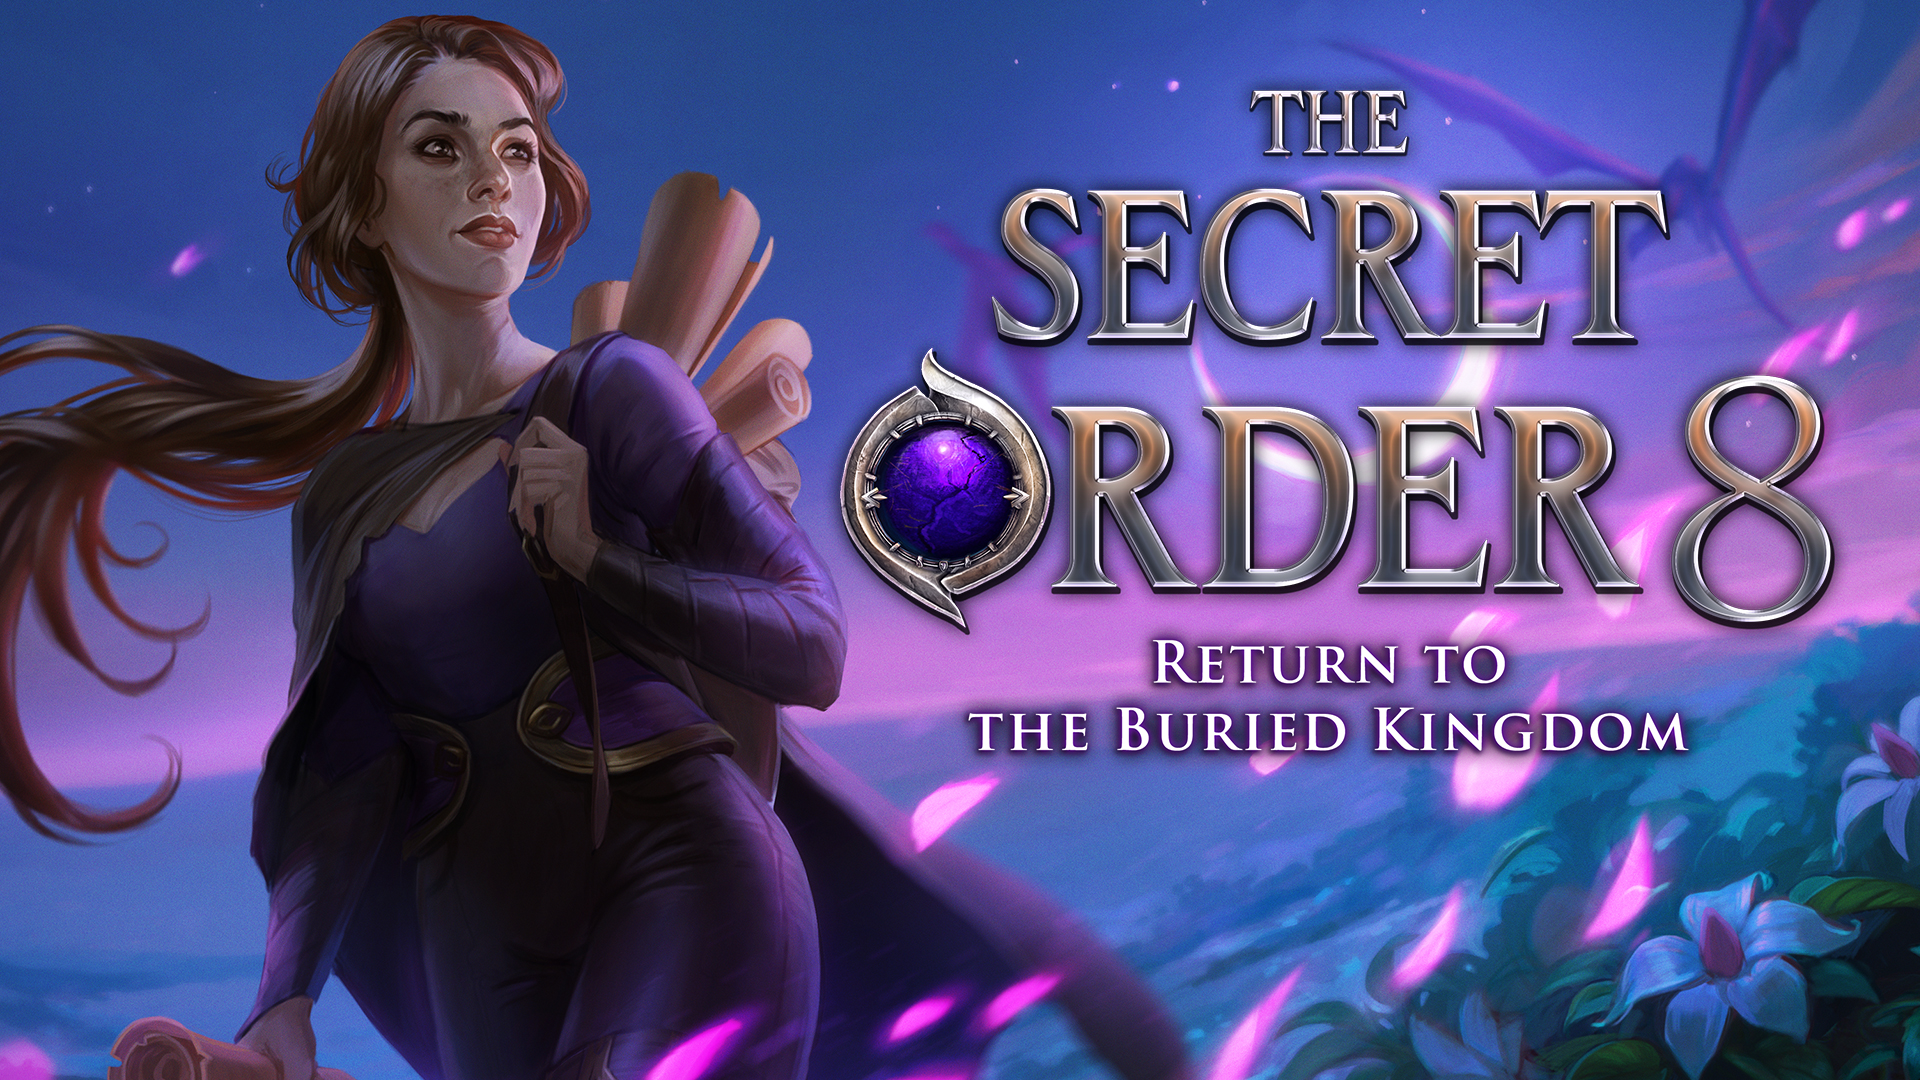 free download The Secret Order 8: Return to the Buried Kingdom